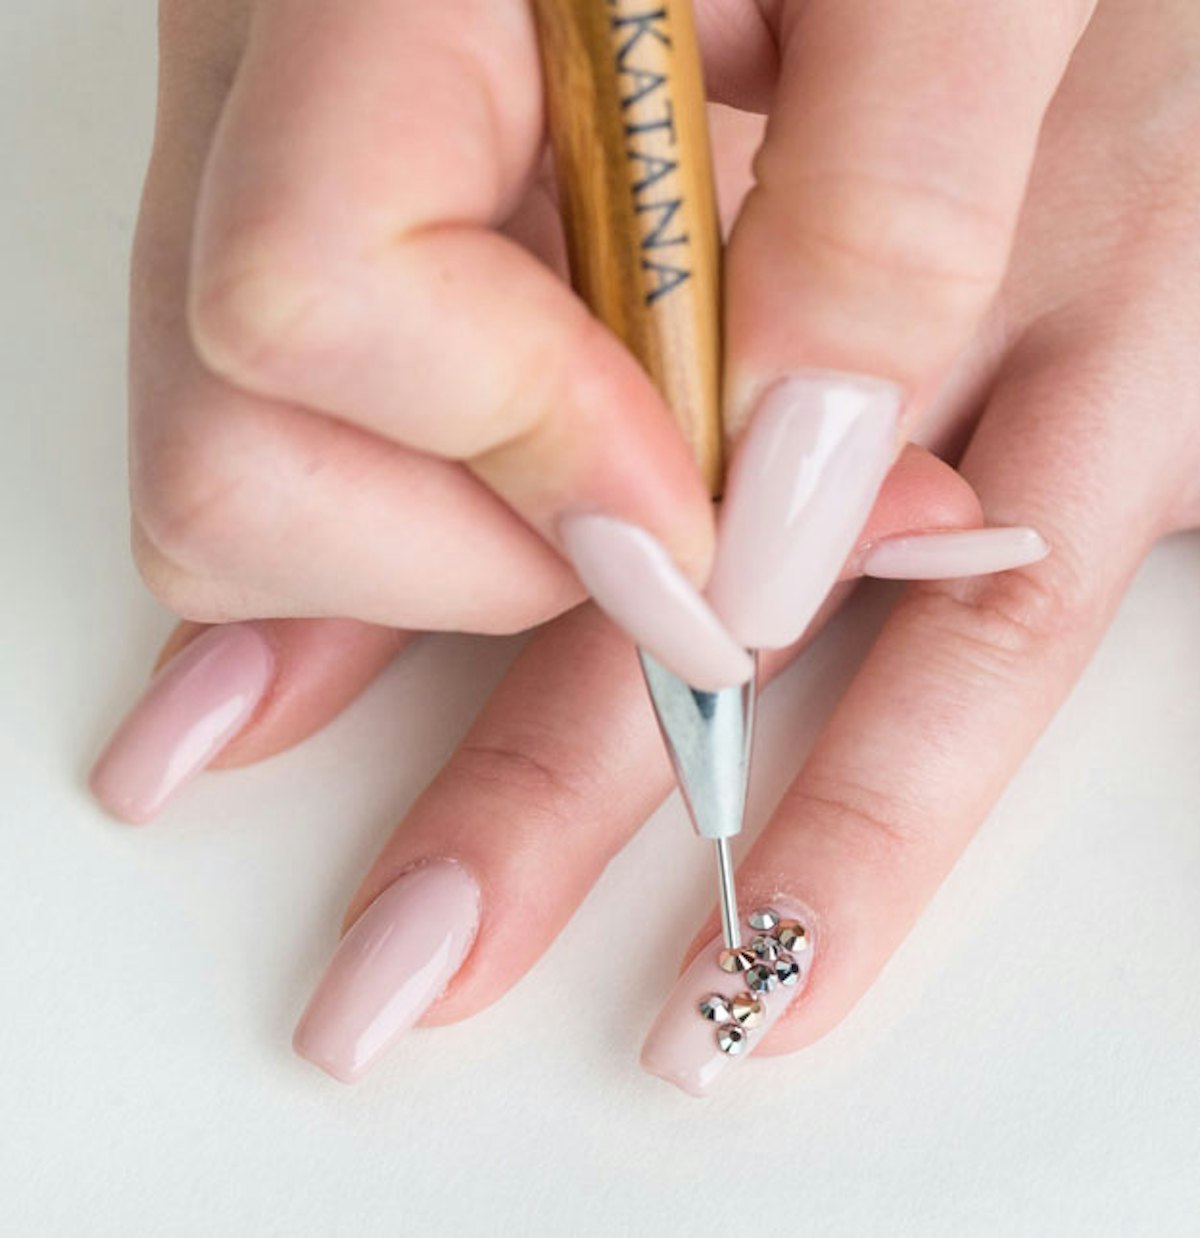 How to apply Swarovski Crystals to Nails 💎 